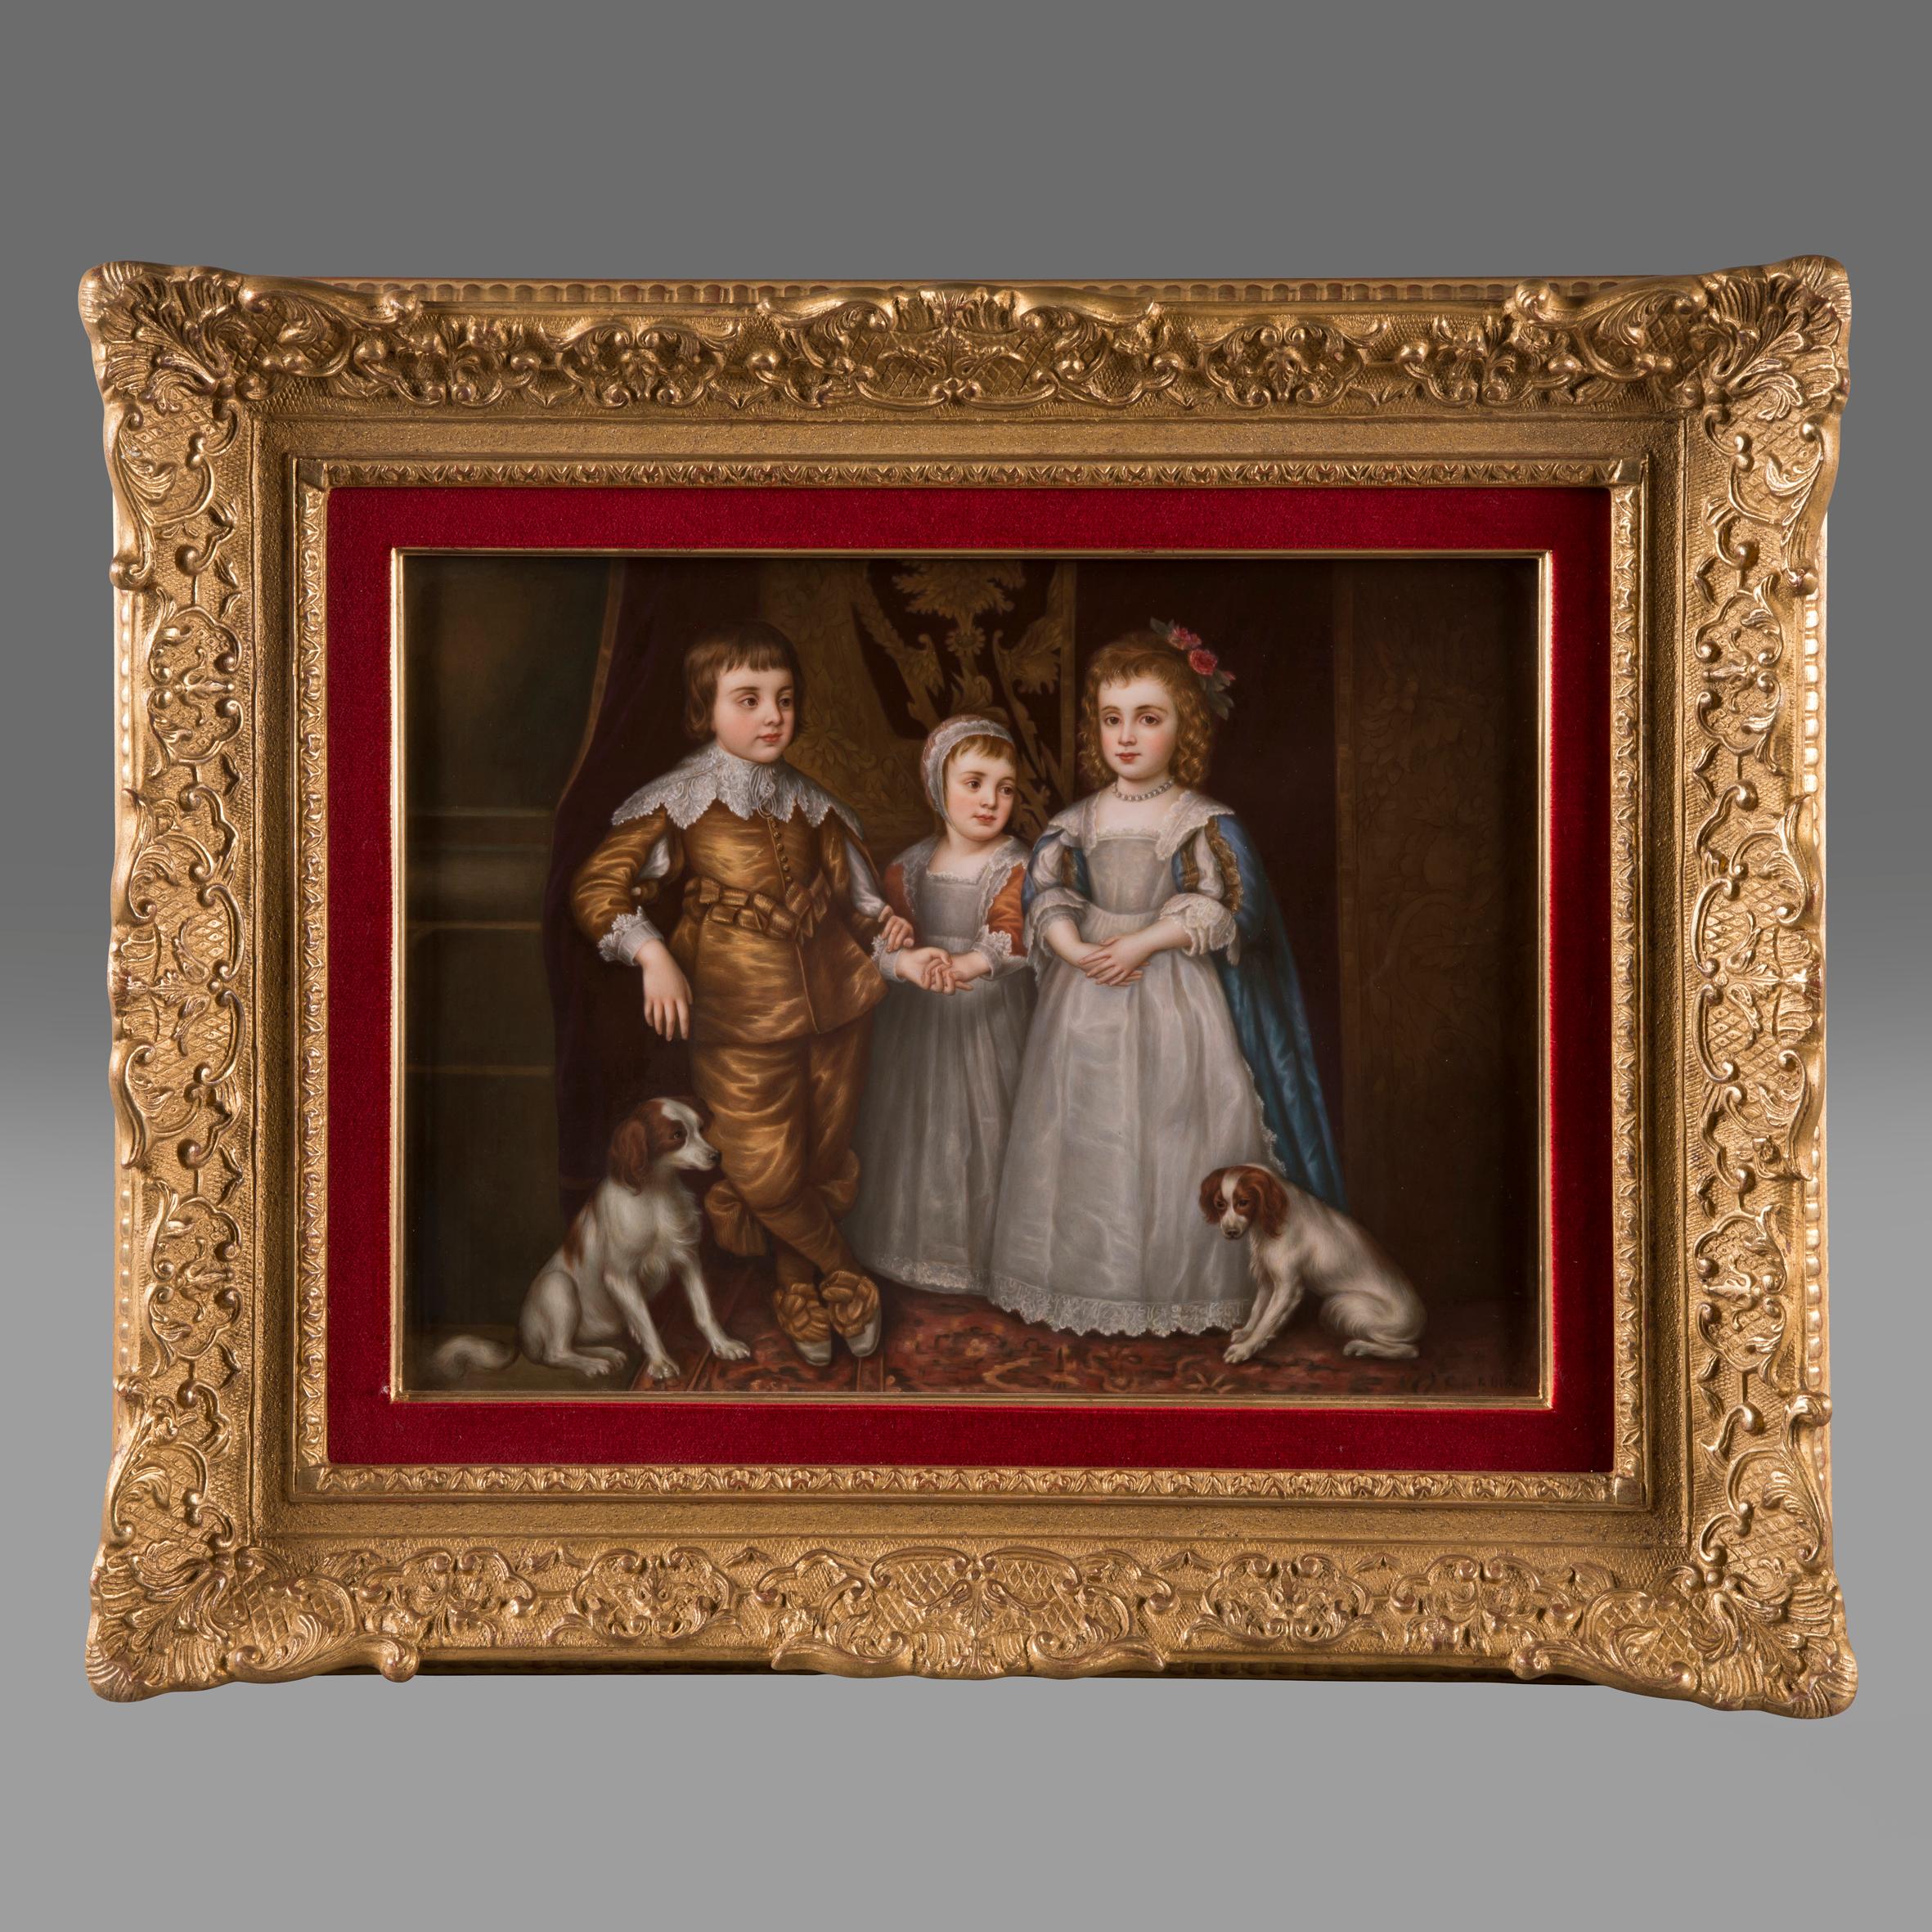 German A KPM Porcelain Plaque After The Painting By Sir Anthony van Dyck, Circa 1890 For Sale